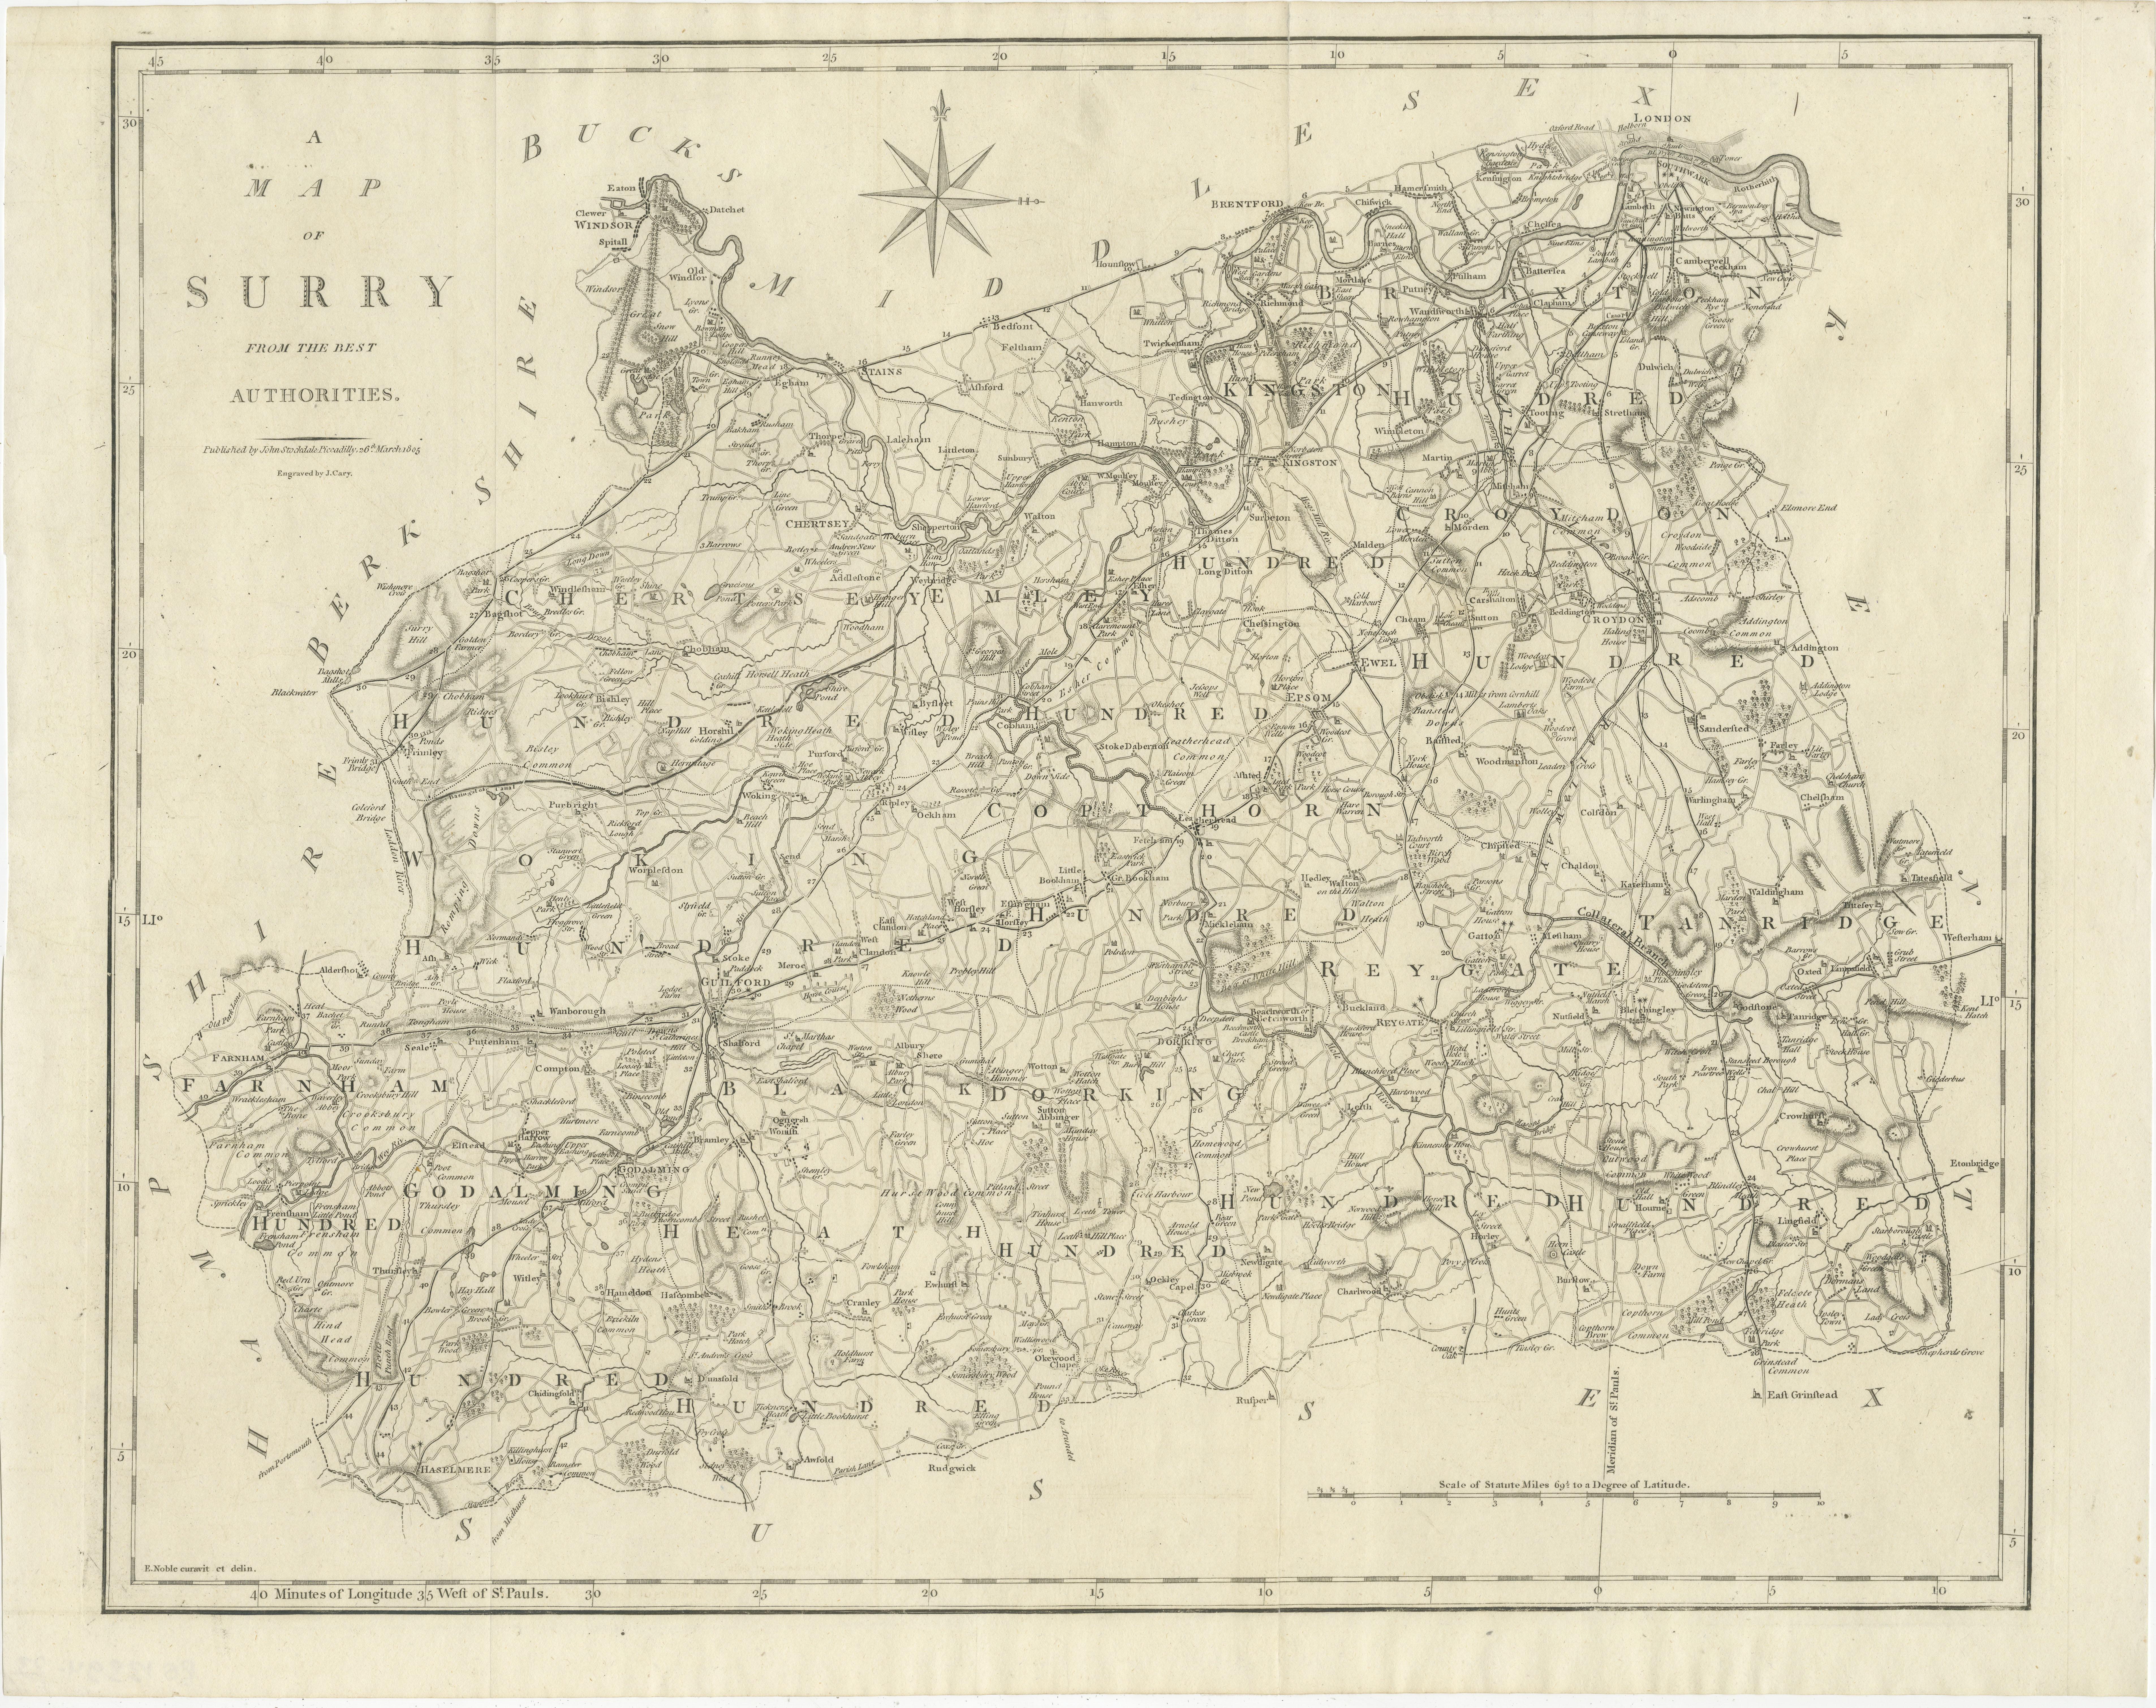 Antique map titled 'A Map of Surry from the best Authorities'. Original old county map of Surrey, England. Engraved by John Cary. Originates from 'New British Atlas' by John Stockdale, published 1805. 

John Cary (1755-1835) was a British